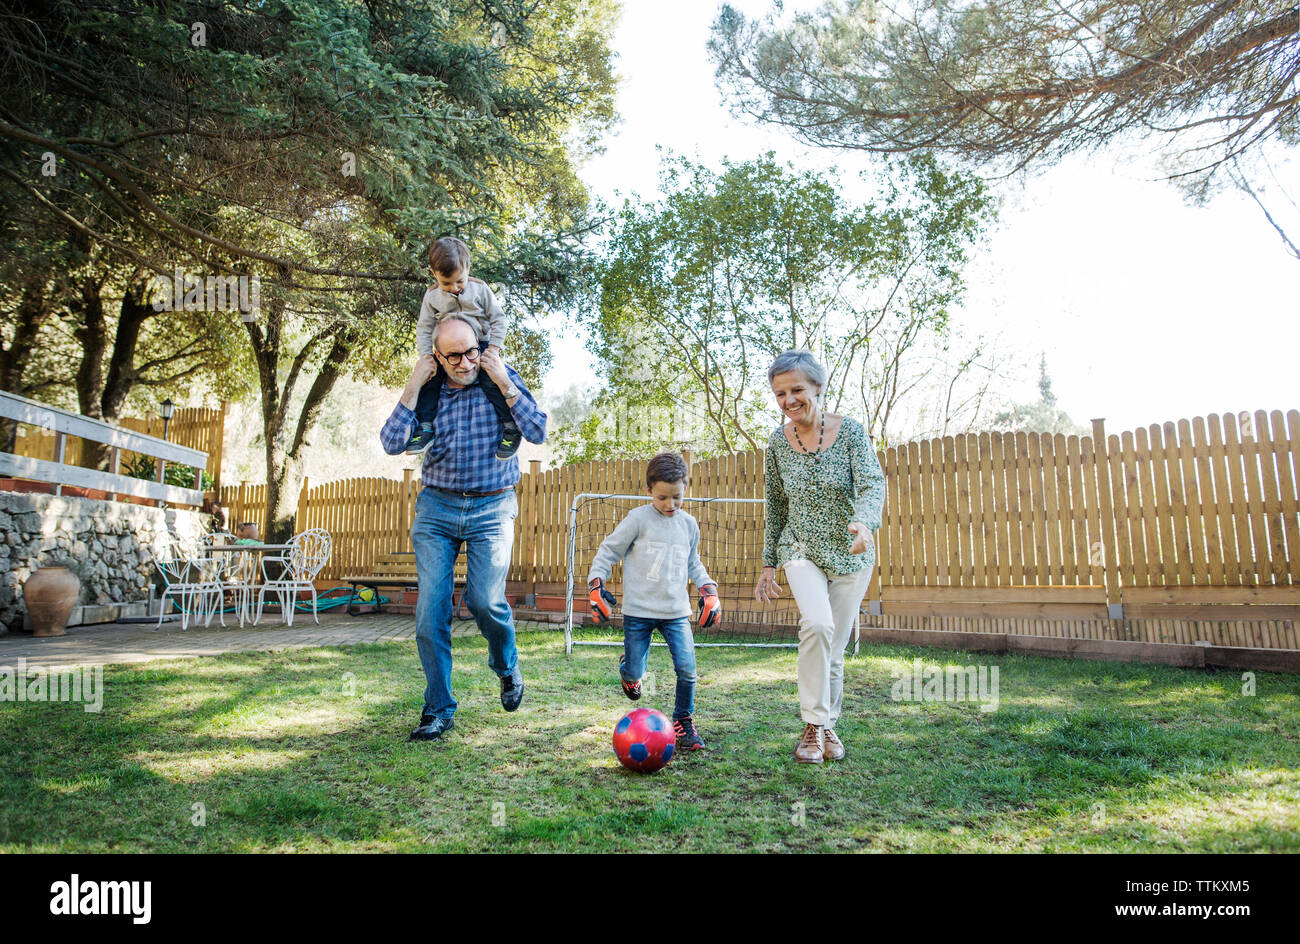 Full length of grandparents and grandsons playing soccer at yard Stock Photo